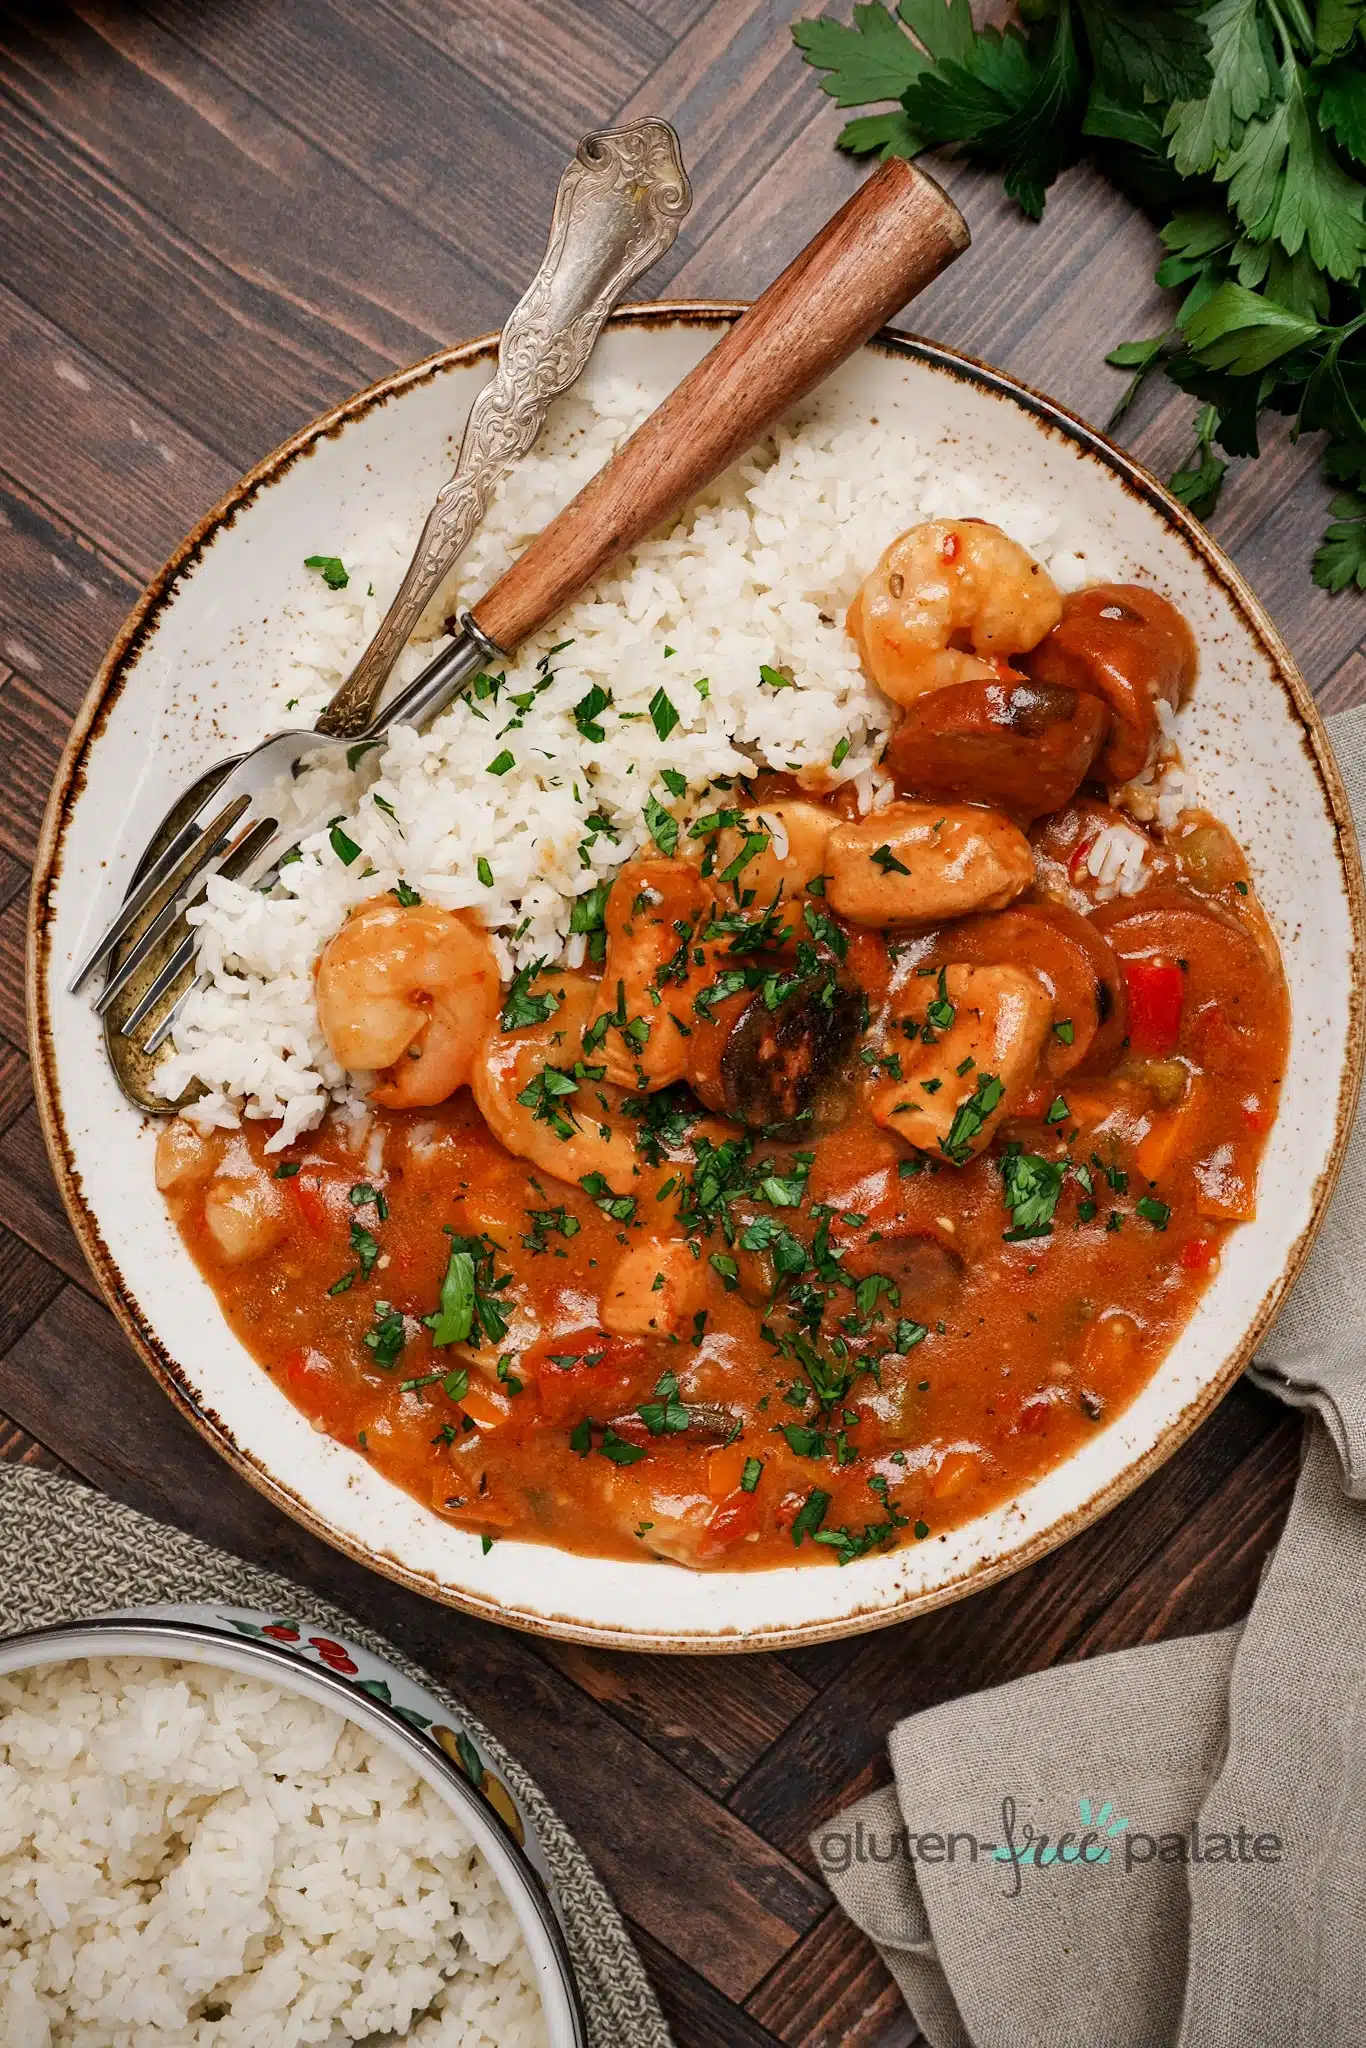 Gluten-free gumbo on a white plate with a fork and spoon.